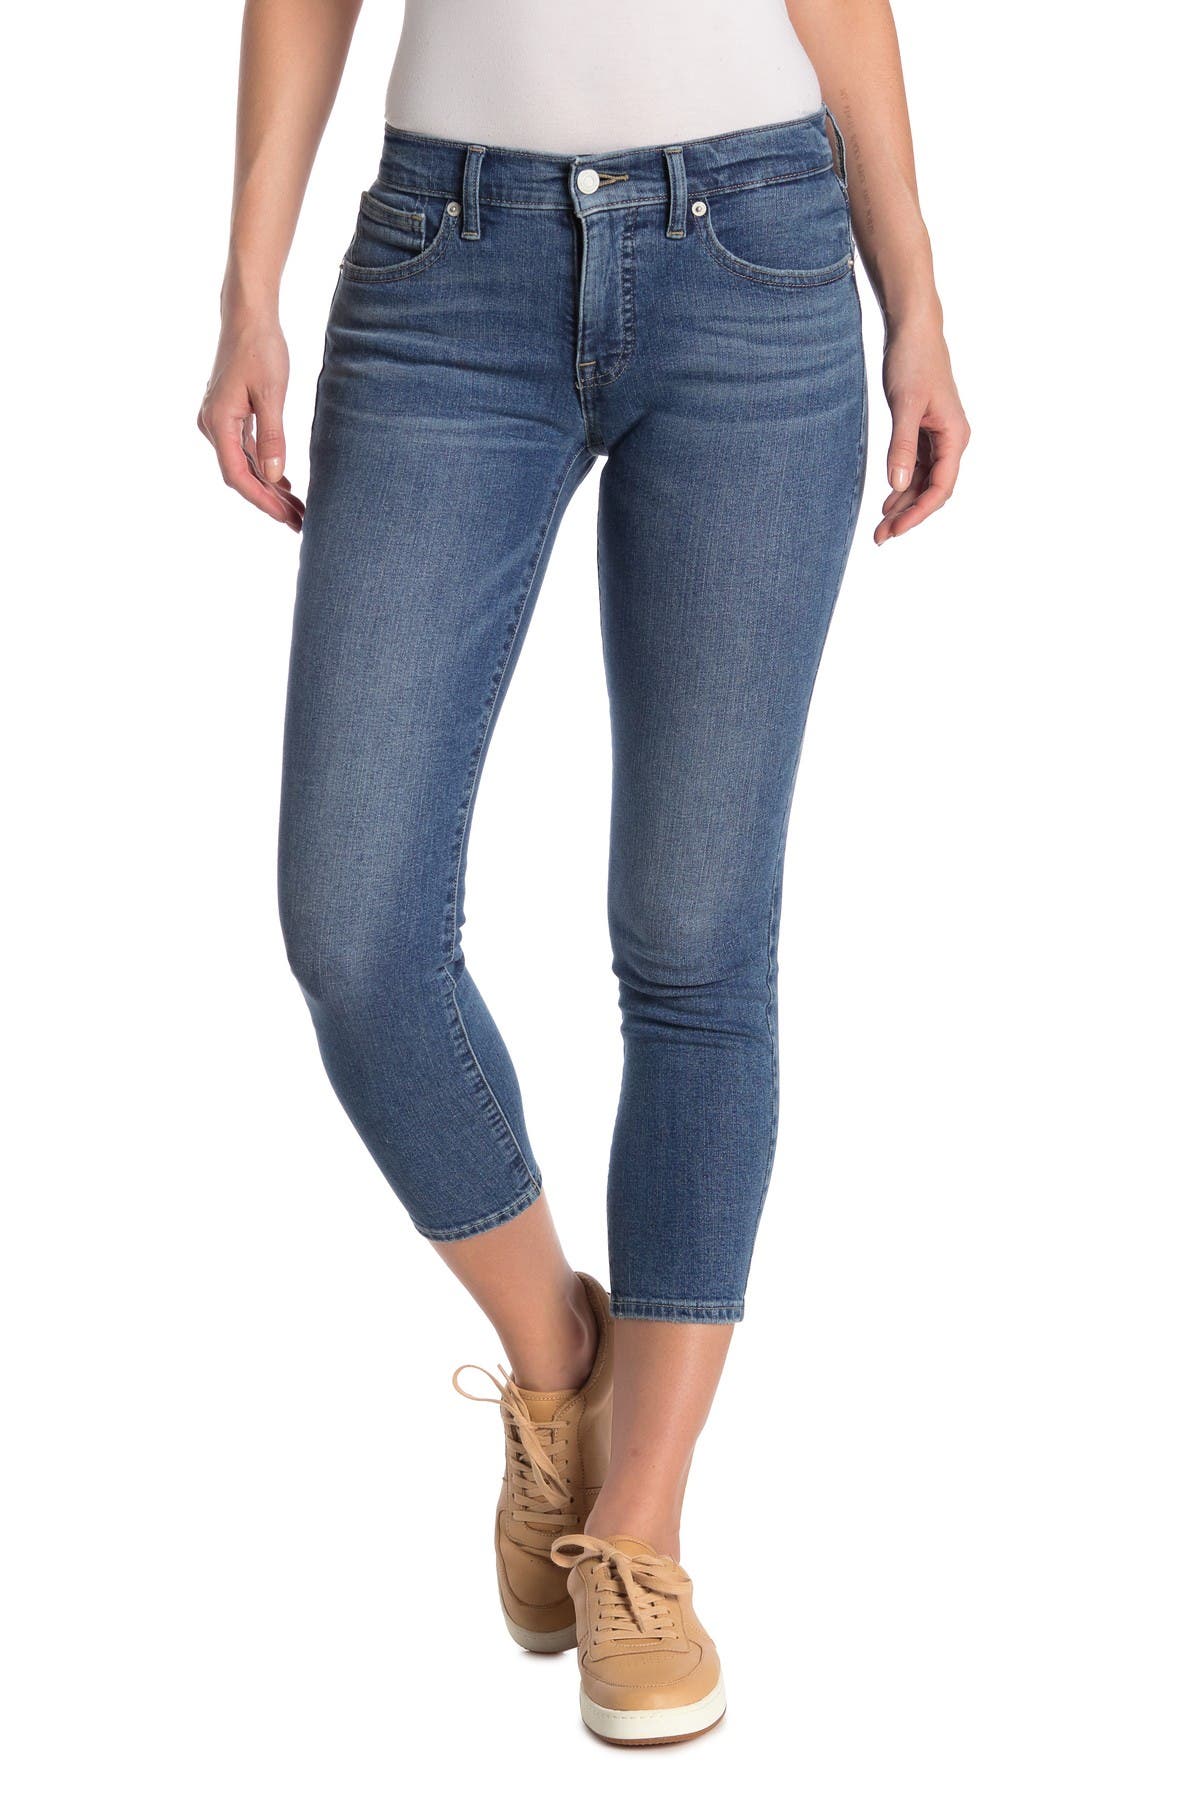 lucky brand womans jeans